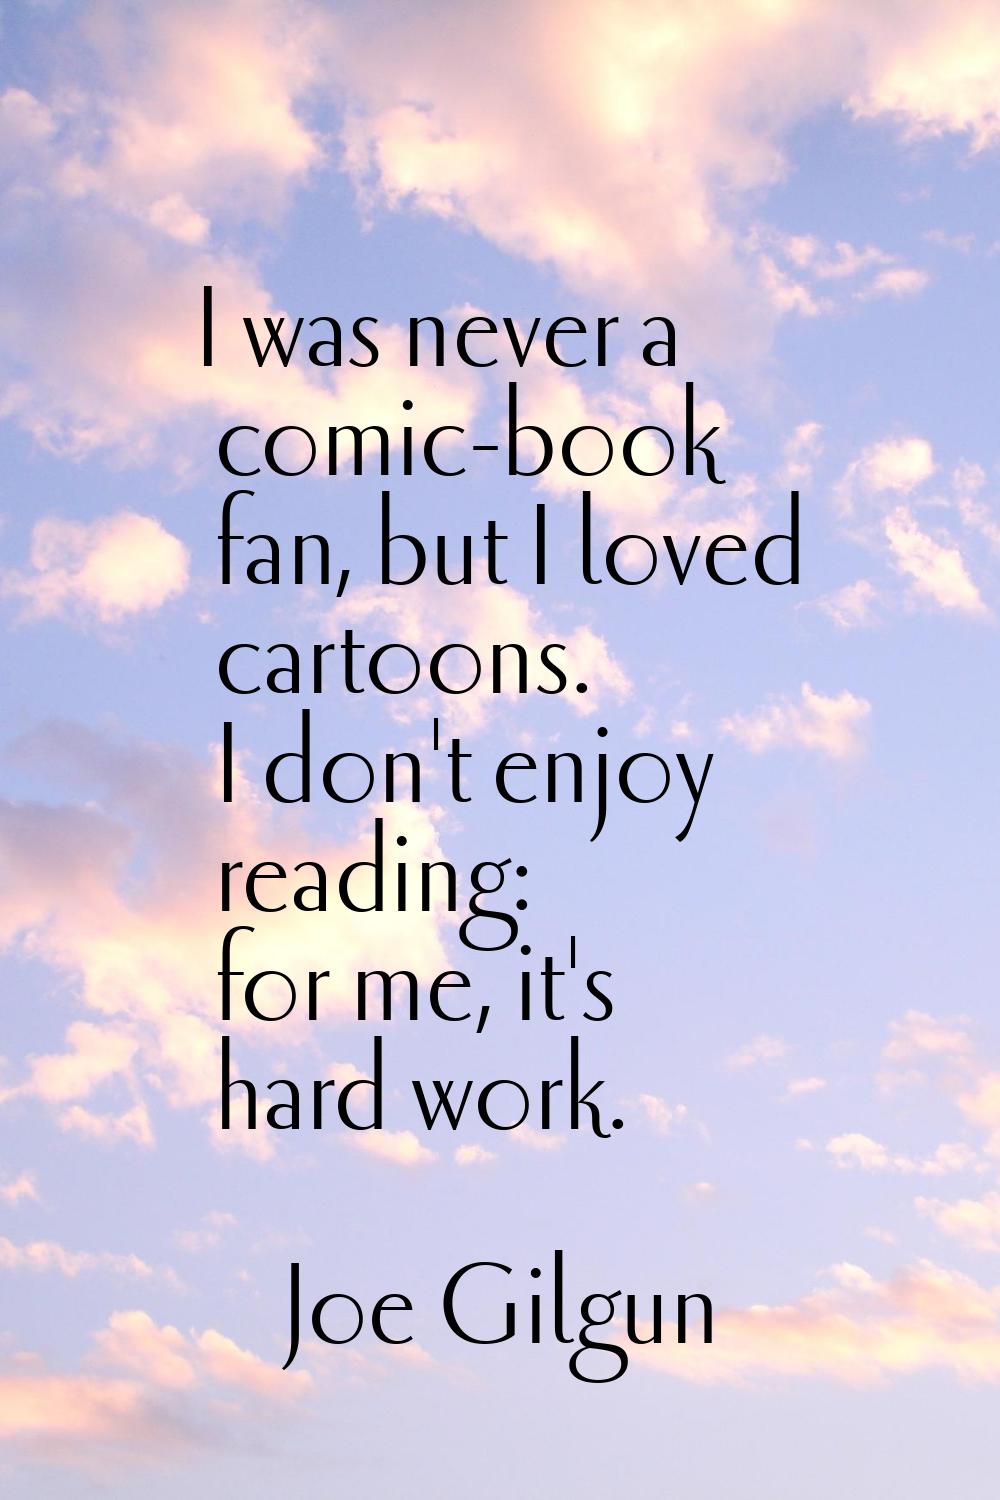 I was never a comic-book fan, but I loved cartoons. I don't enjoy reading: for me, it's hard work.